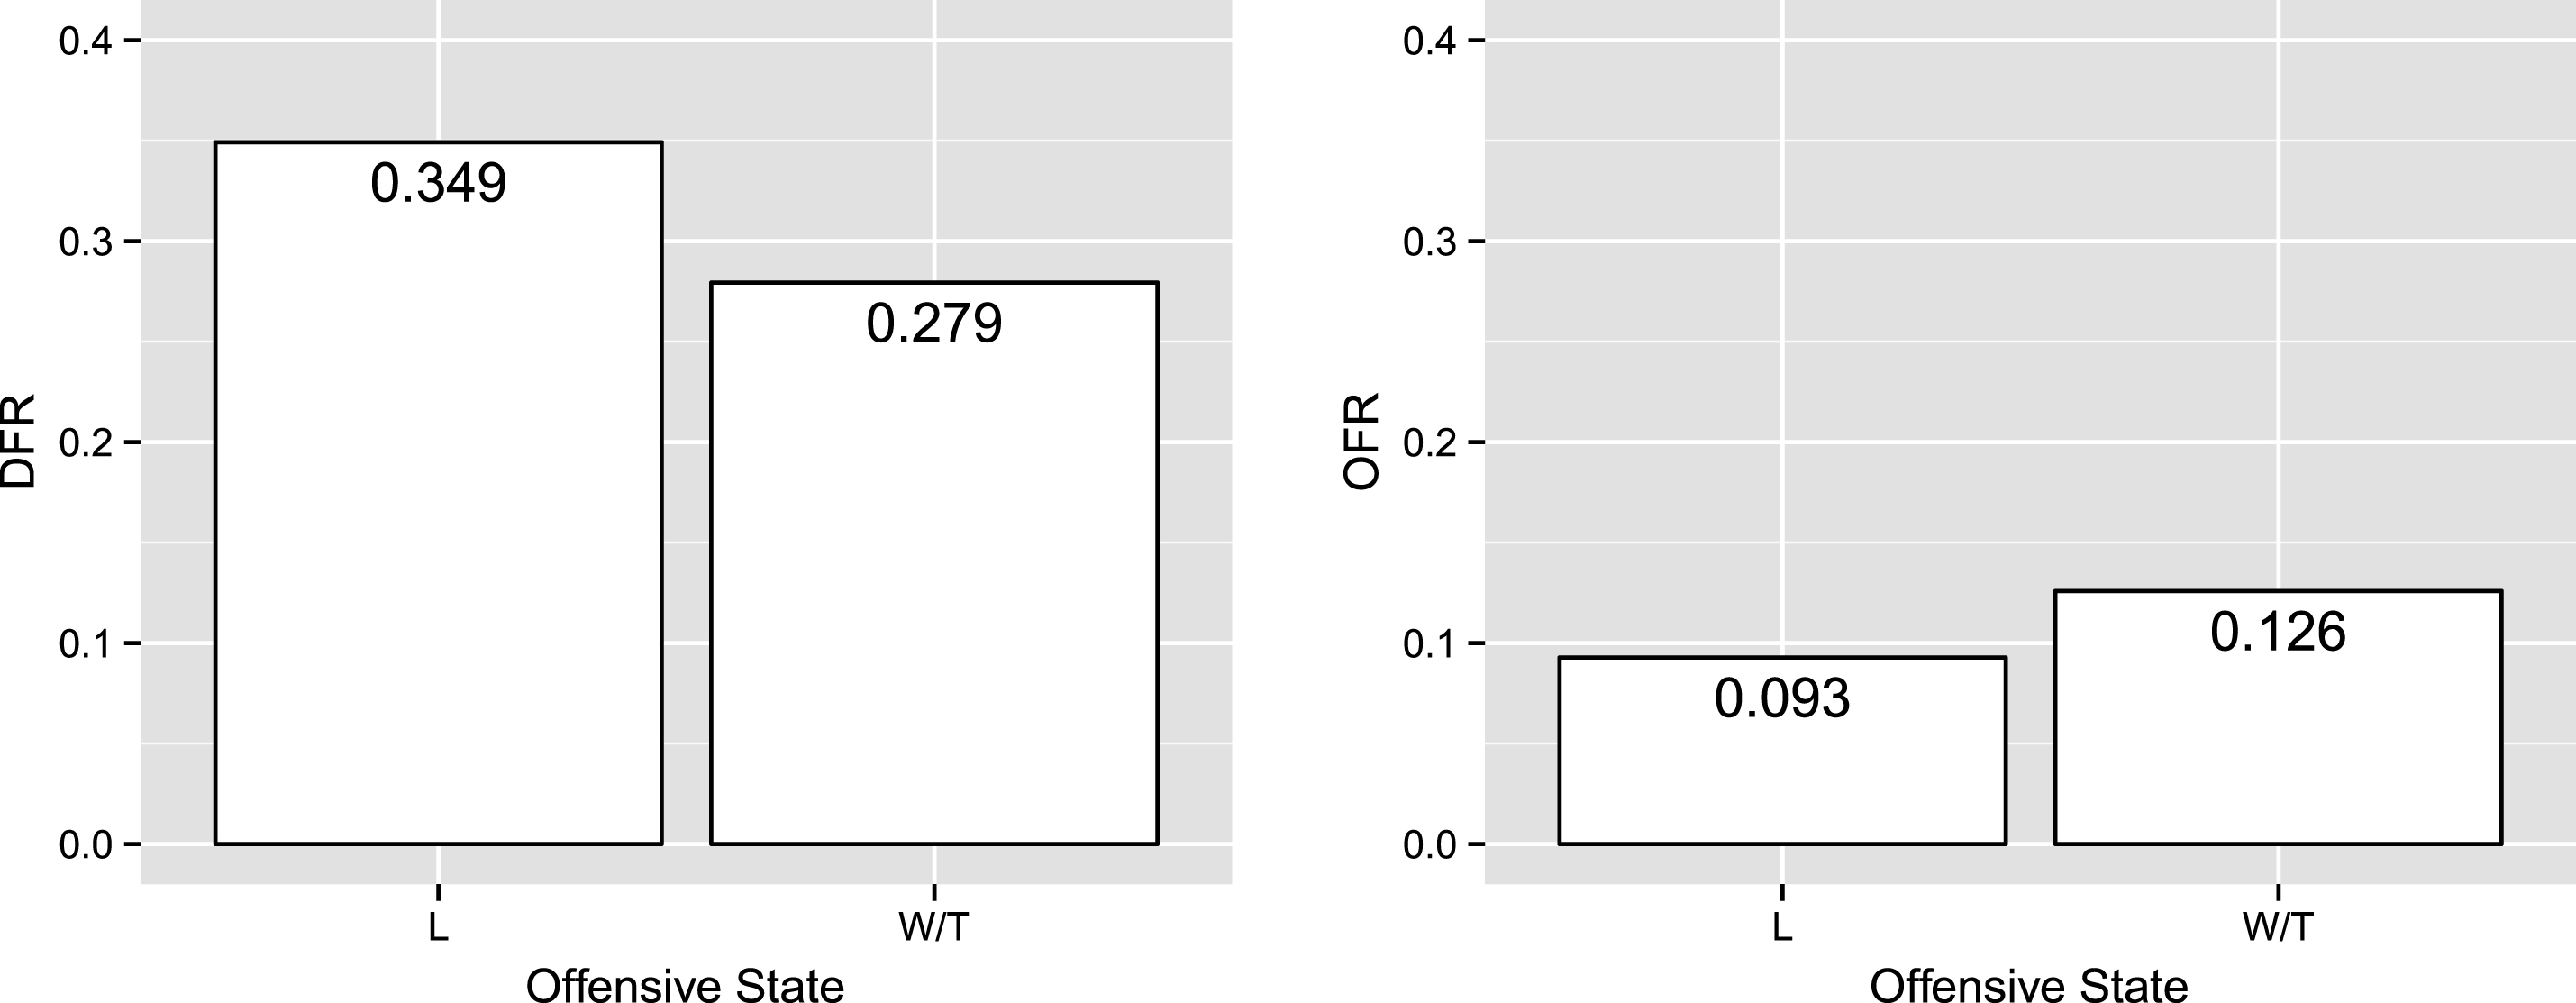 Bar plot demonstrating losing team bias in both defensive (left) and offensive (right) foul calling rates.